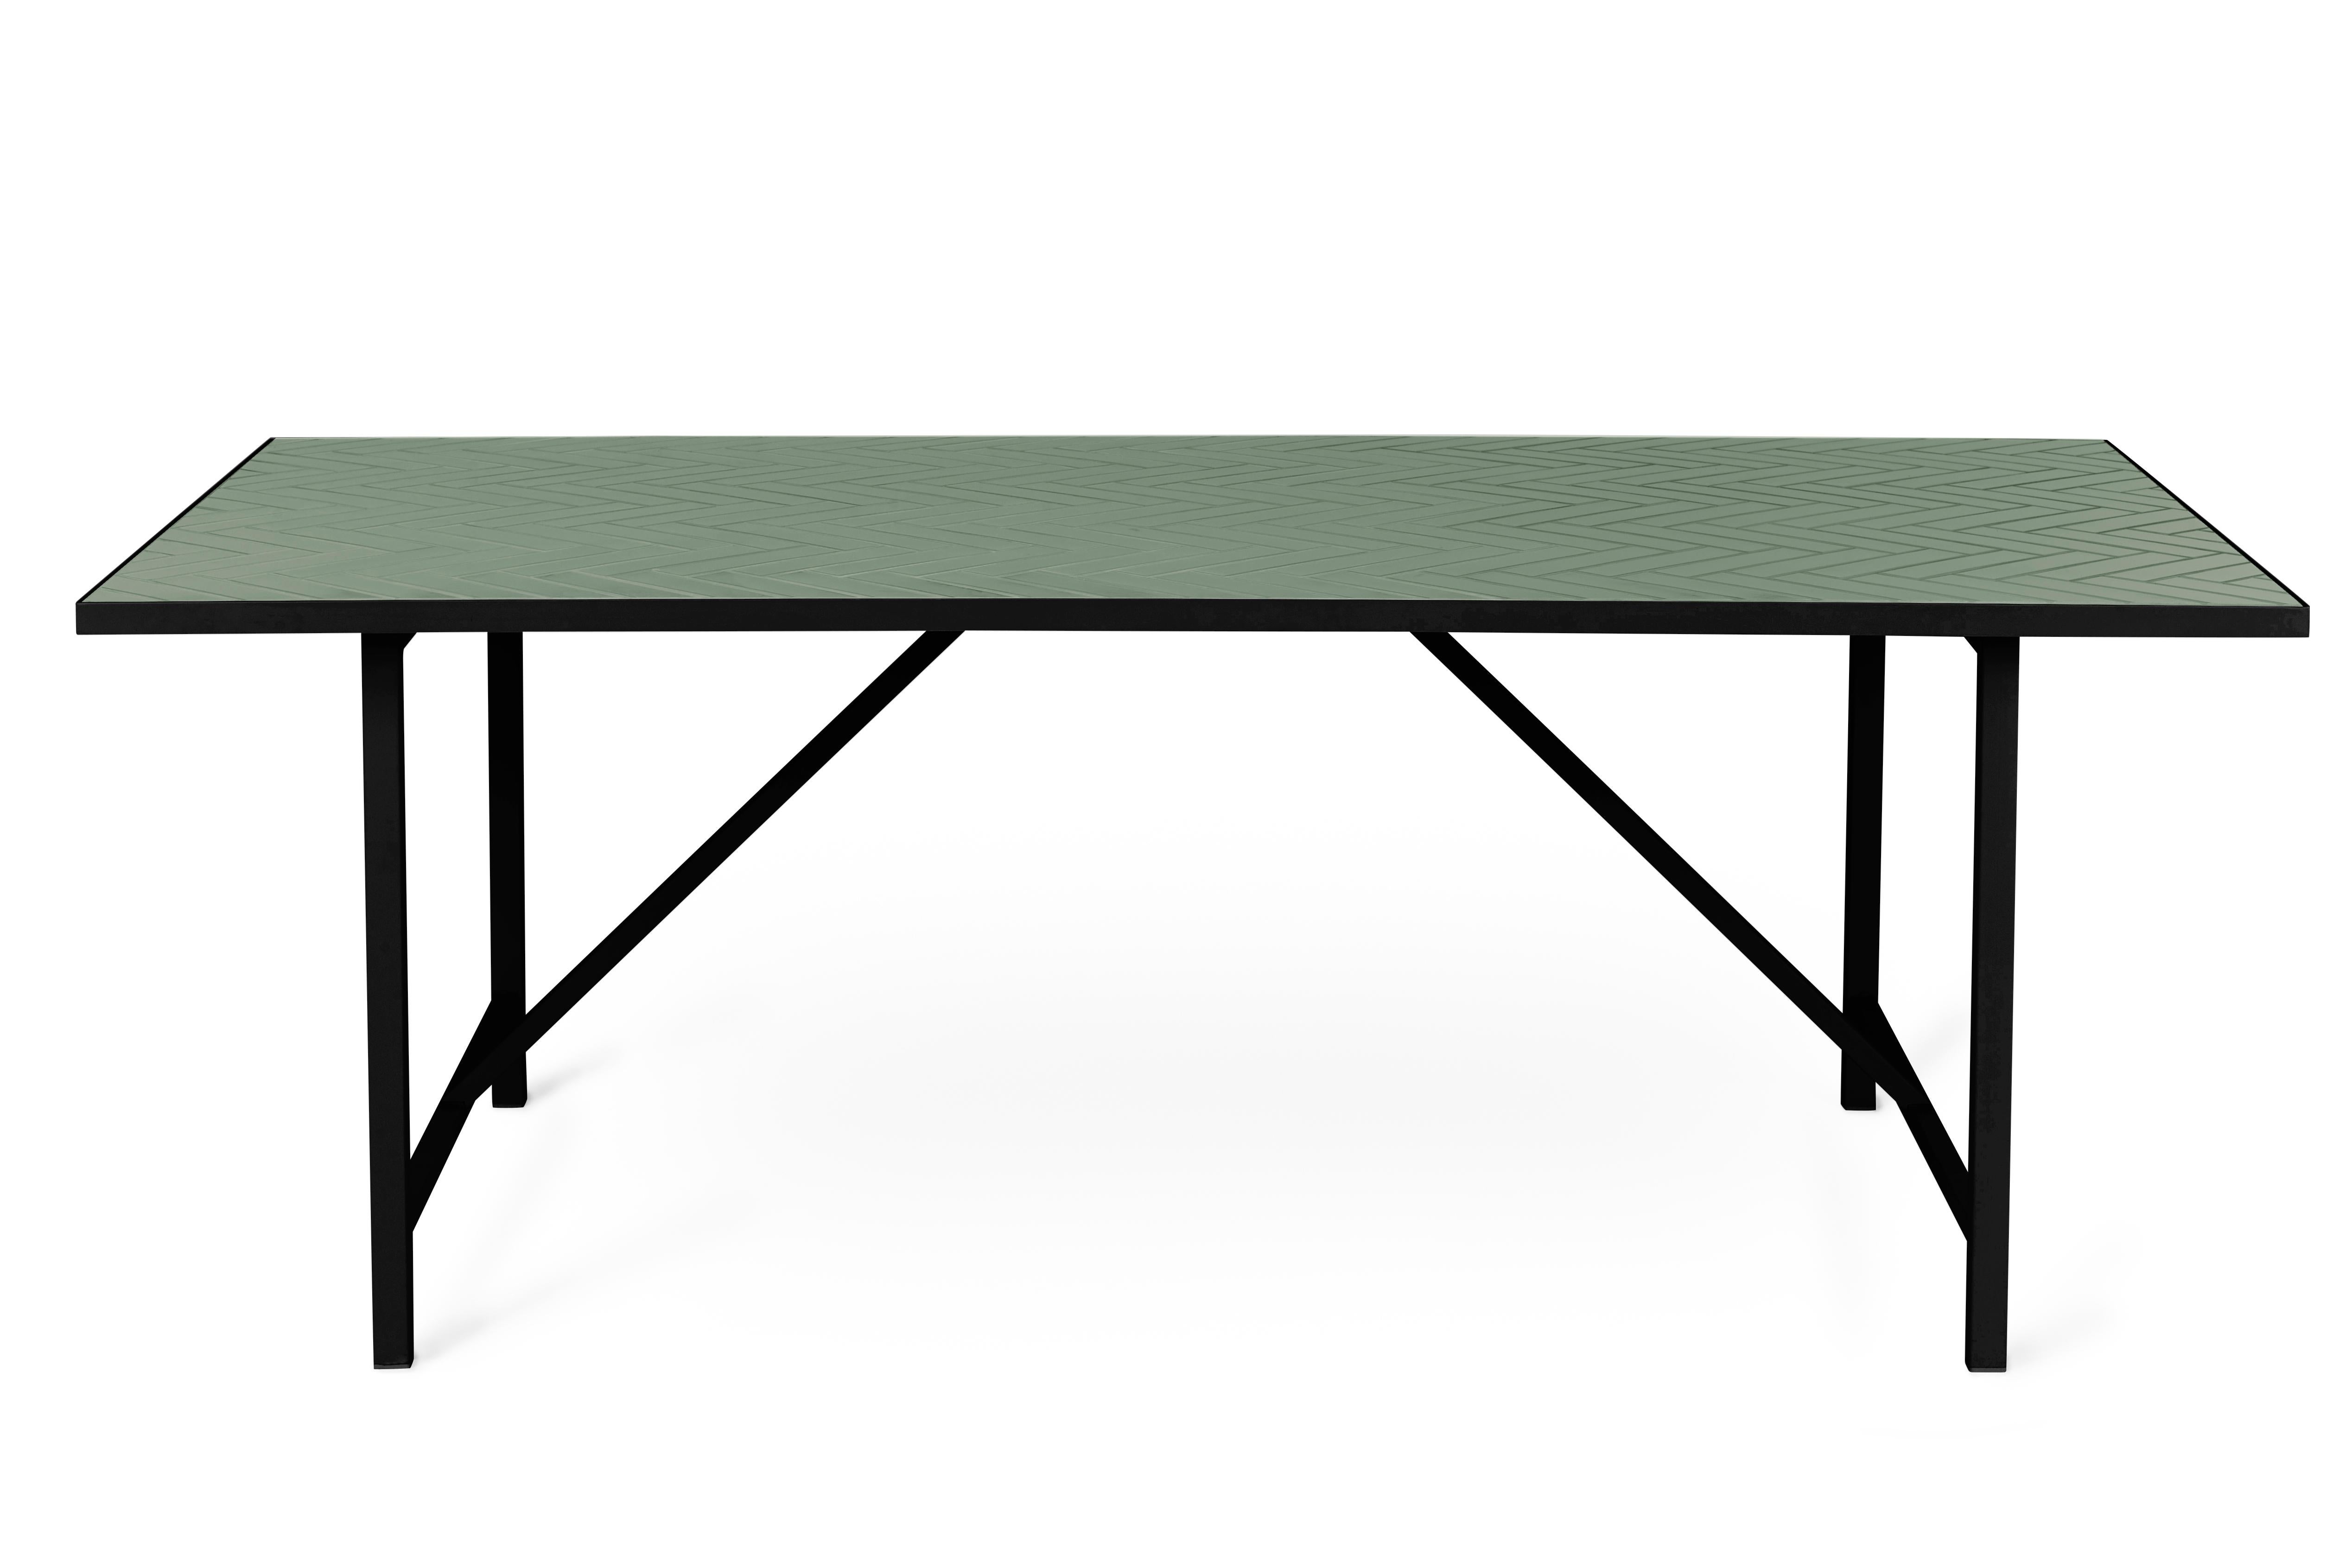 For Sale: Green (Forest green) Herringbone Dining Table, by Charlotte Høncke from Warm Nordic